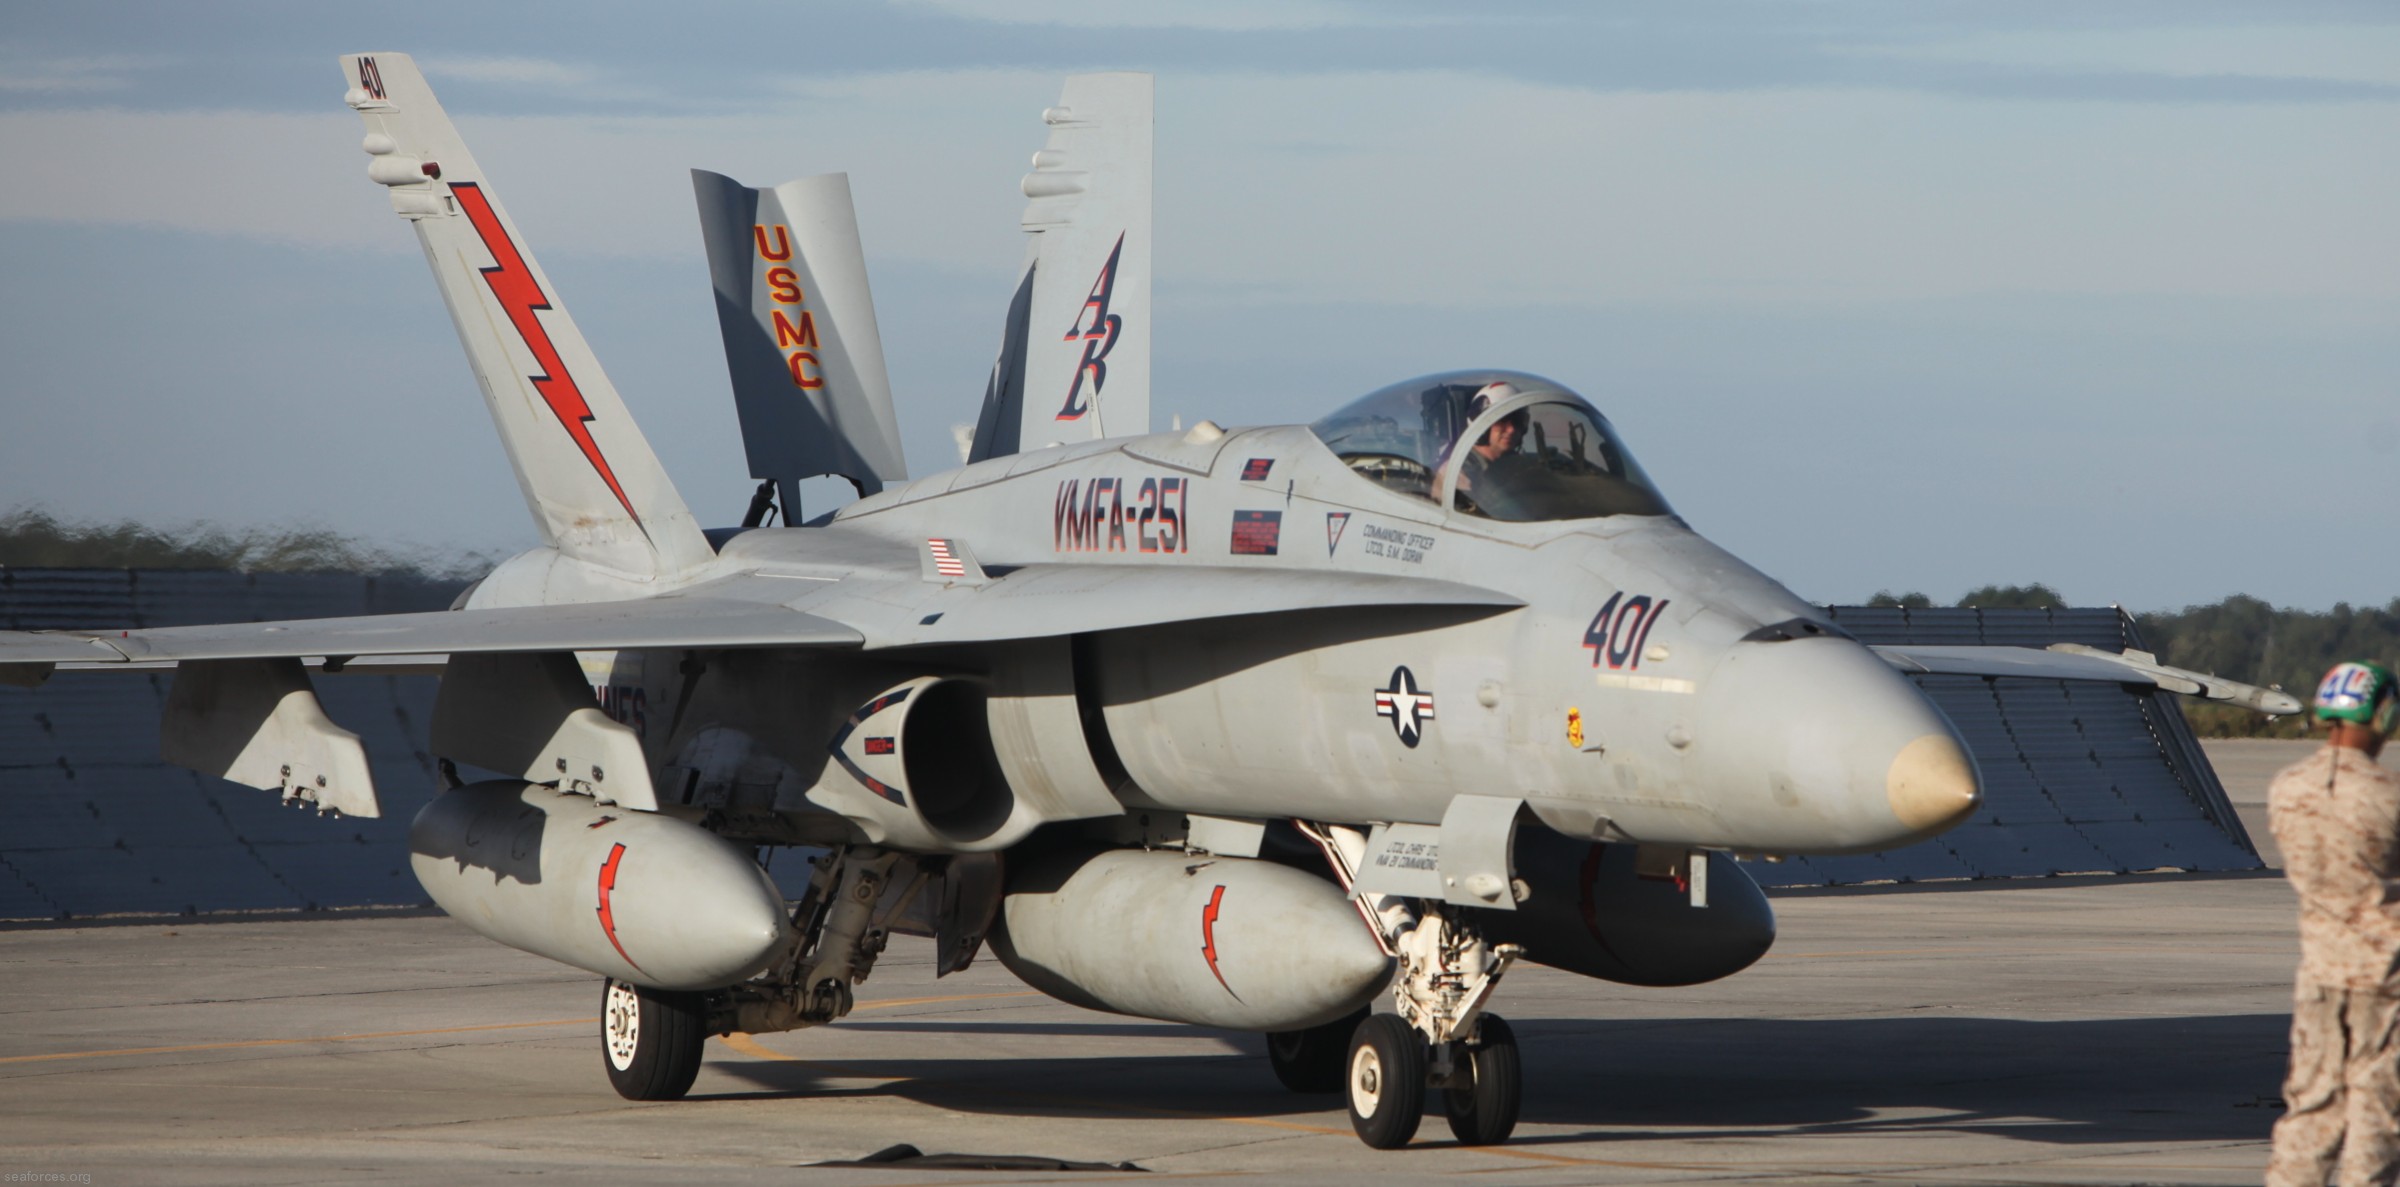 vmfa-251 thunderbolts marine fighter attack squadron f/a-18c hornet 138 mcas beaufort